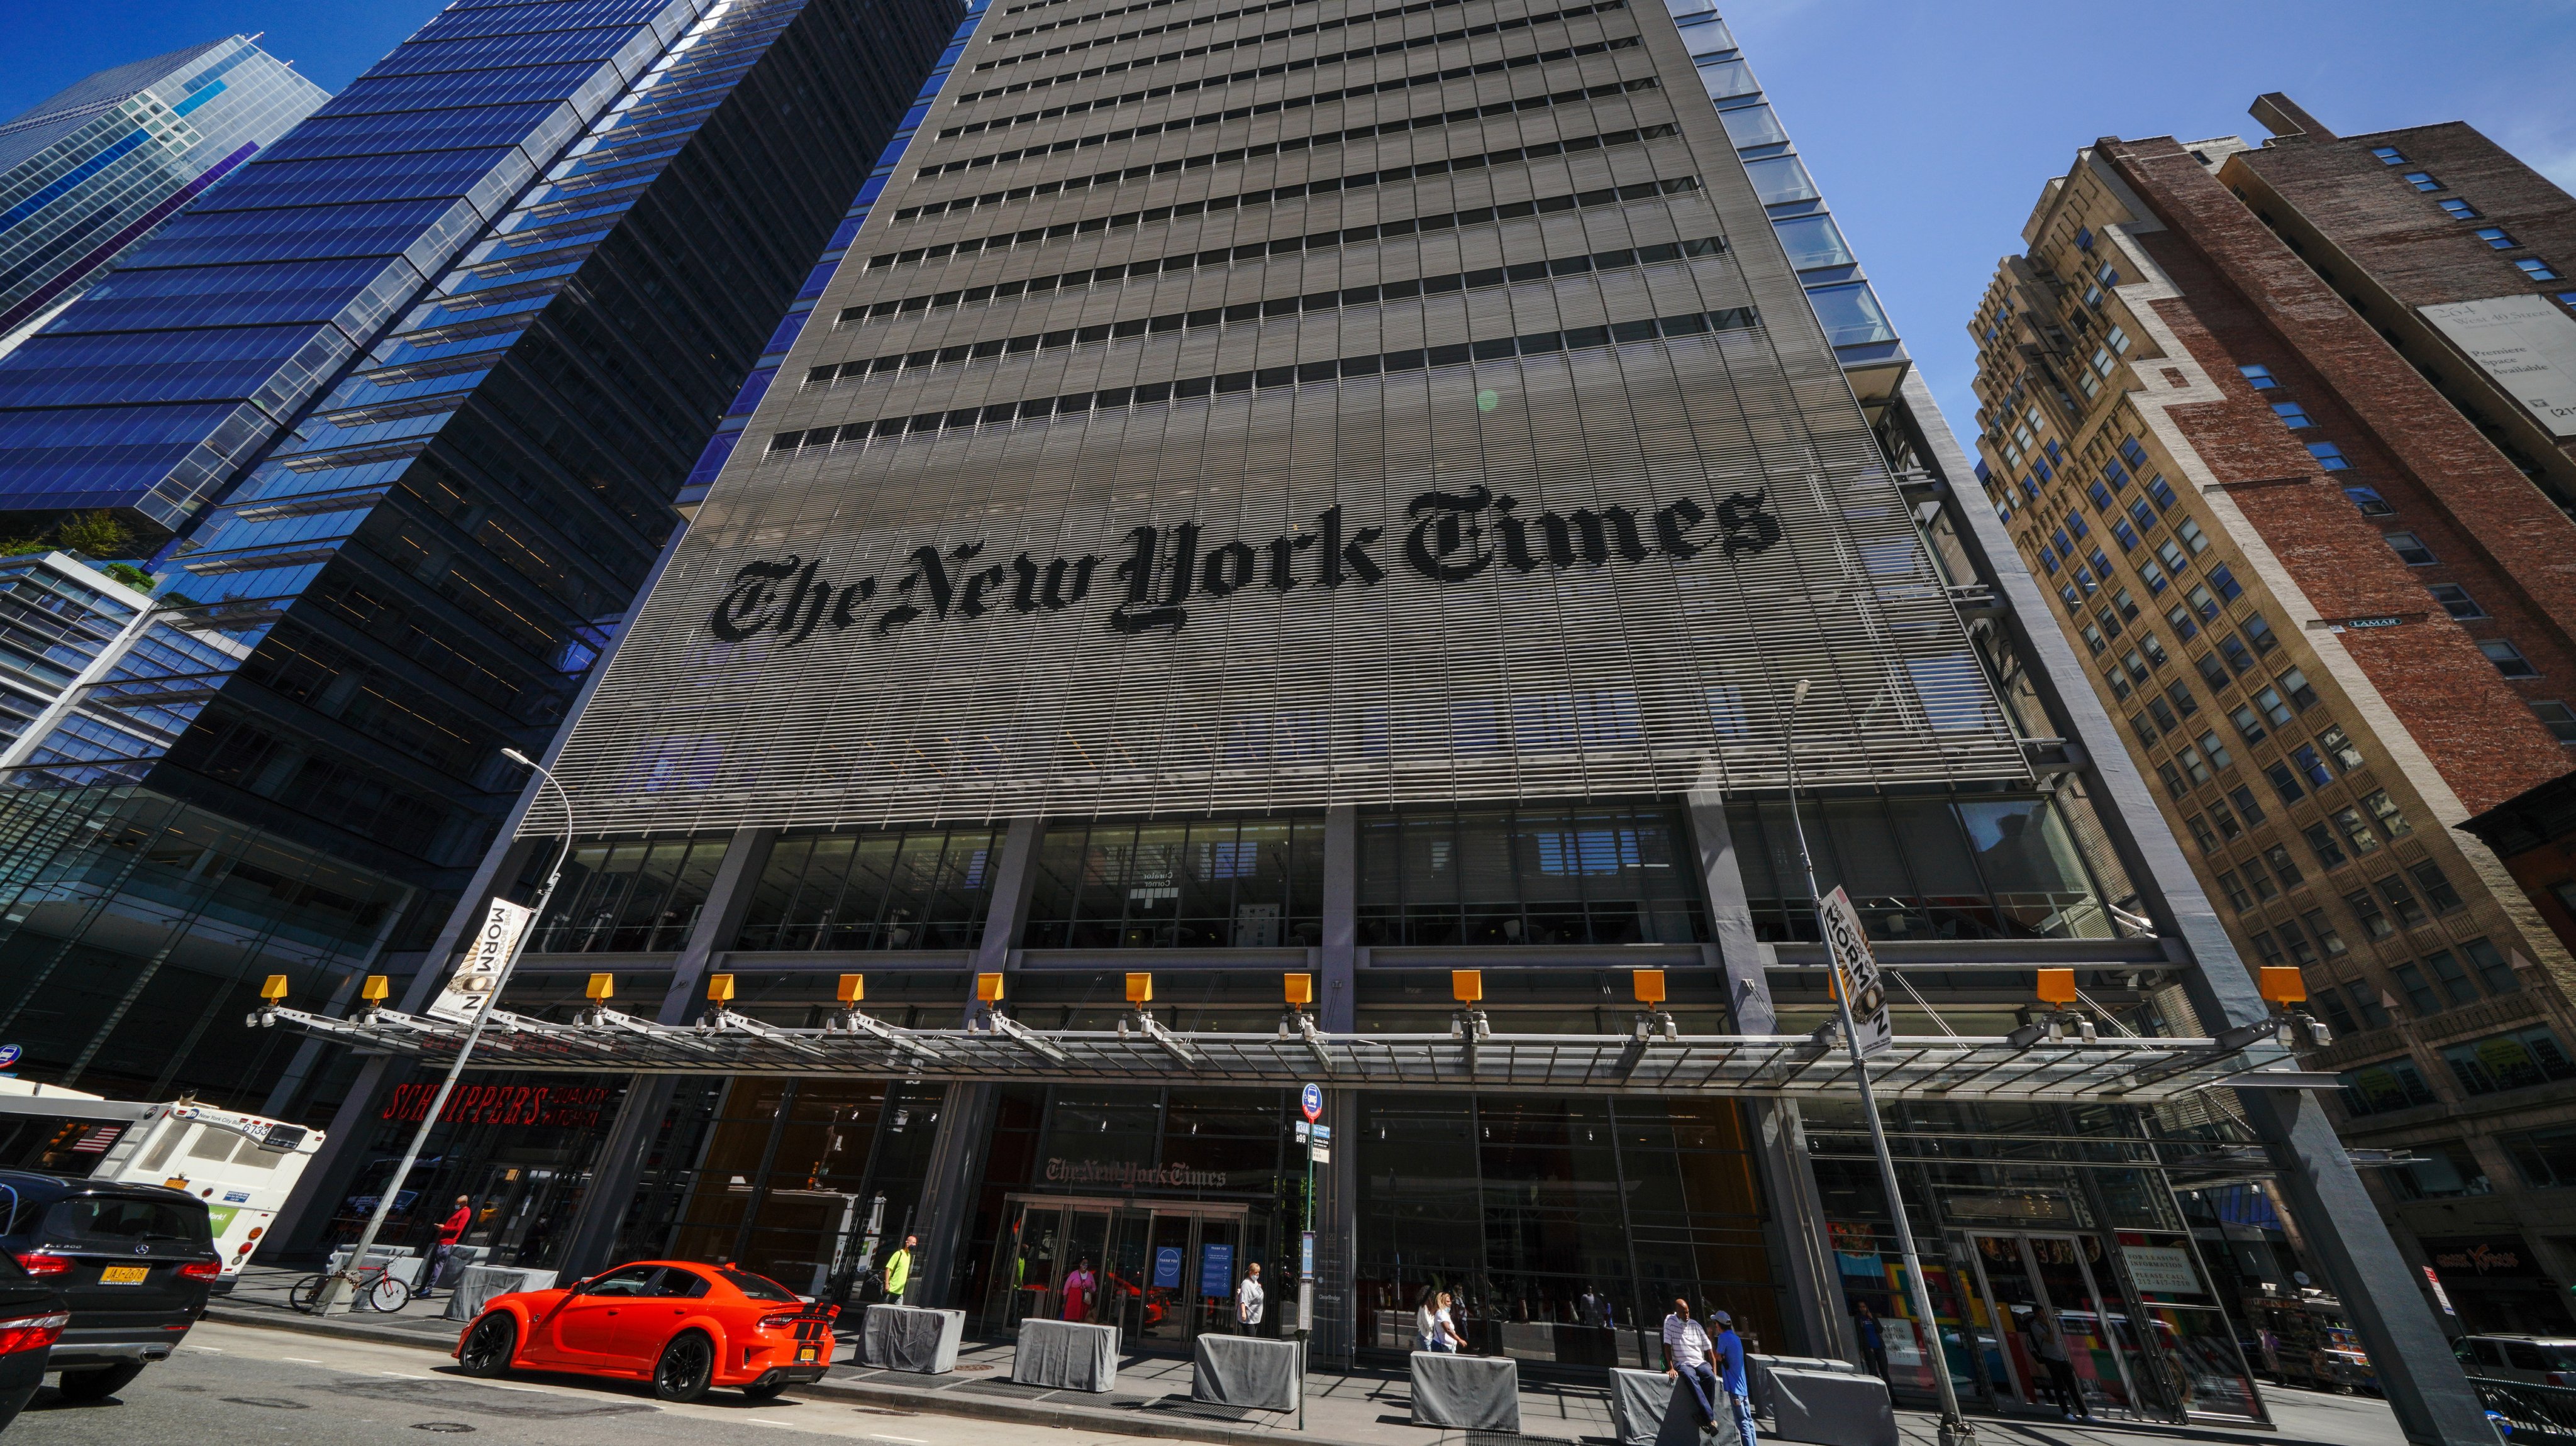 A view of The New York Times Building Headquarters